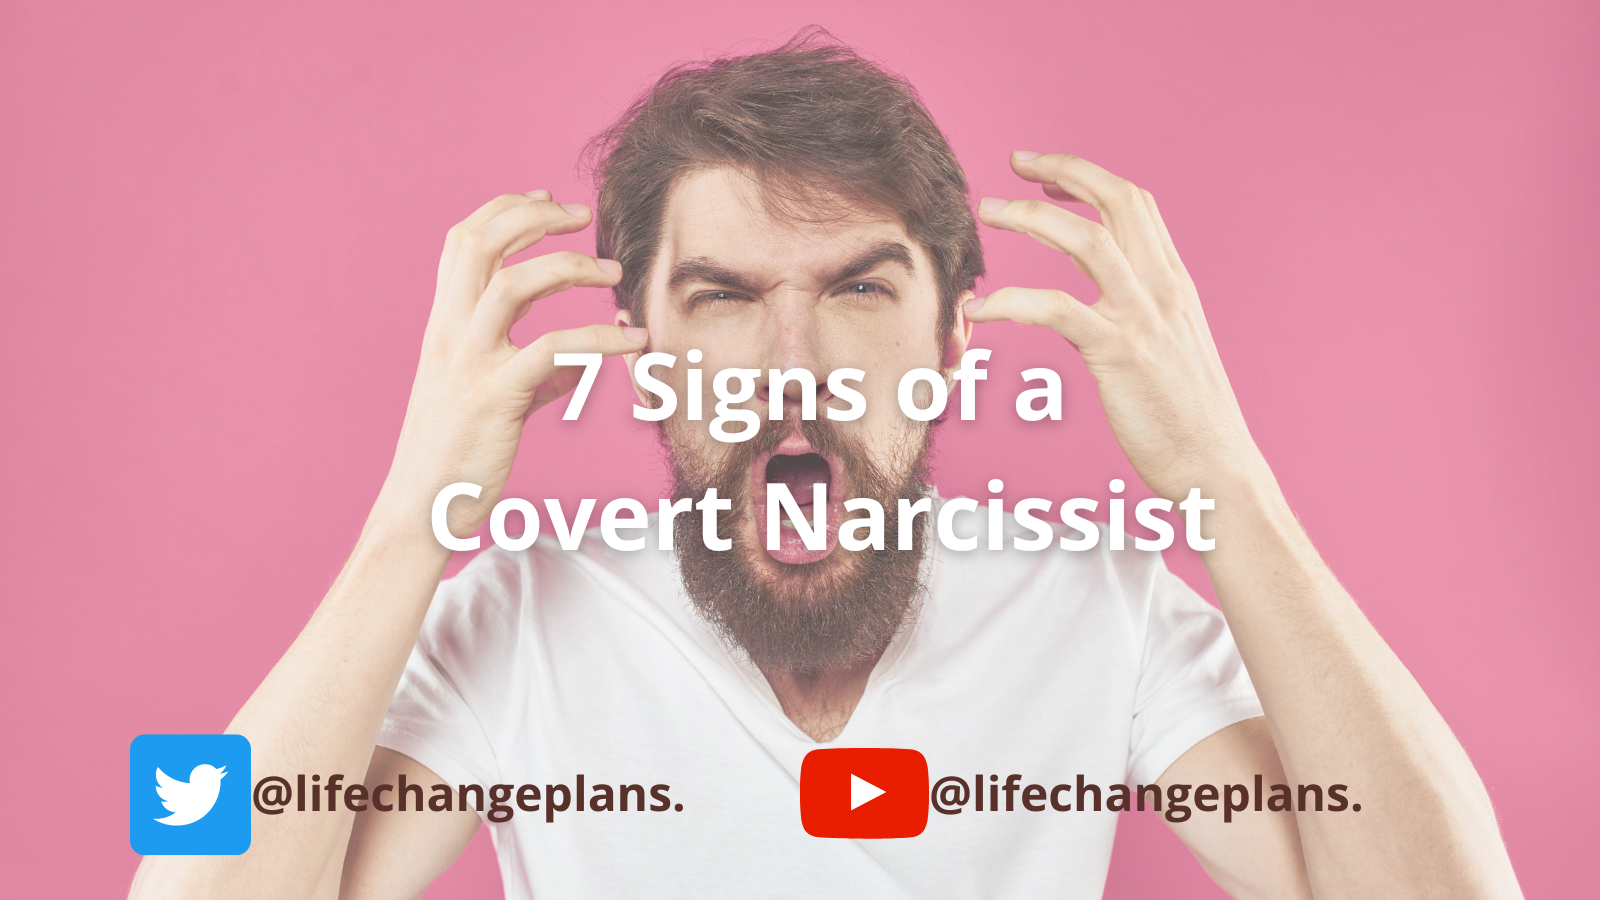 7 signs of covert natcissists